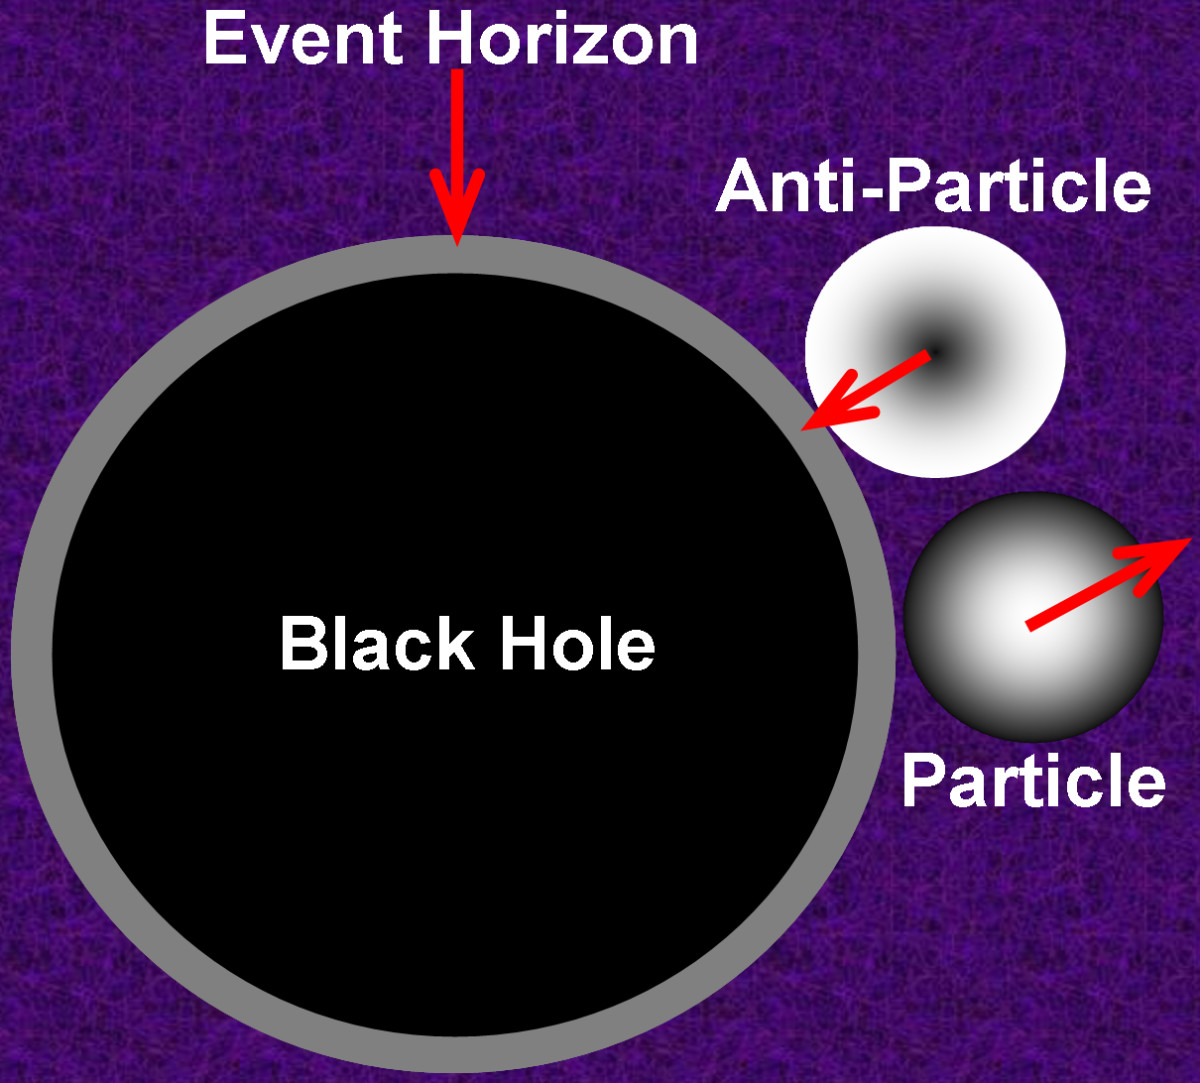 Illustrating that quantum fluctuations help explain how black holes can shrink in size (due to the anti-particles falling into the event horizon) while emitting Hawking radiation (due to the regular particles escaping the black hole).